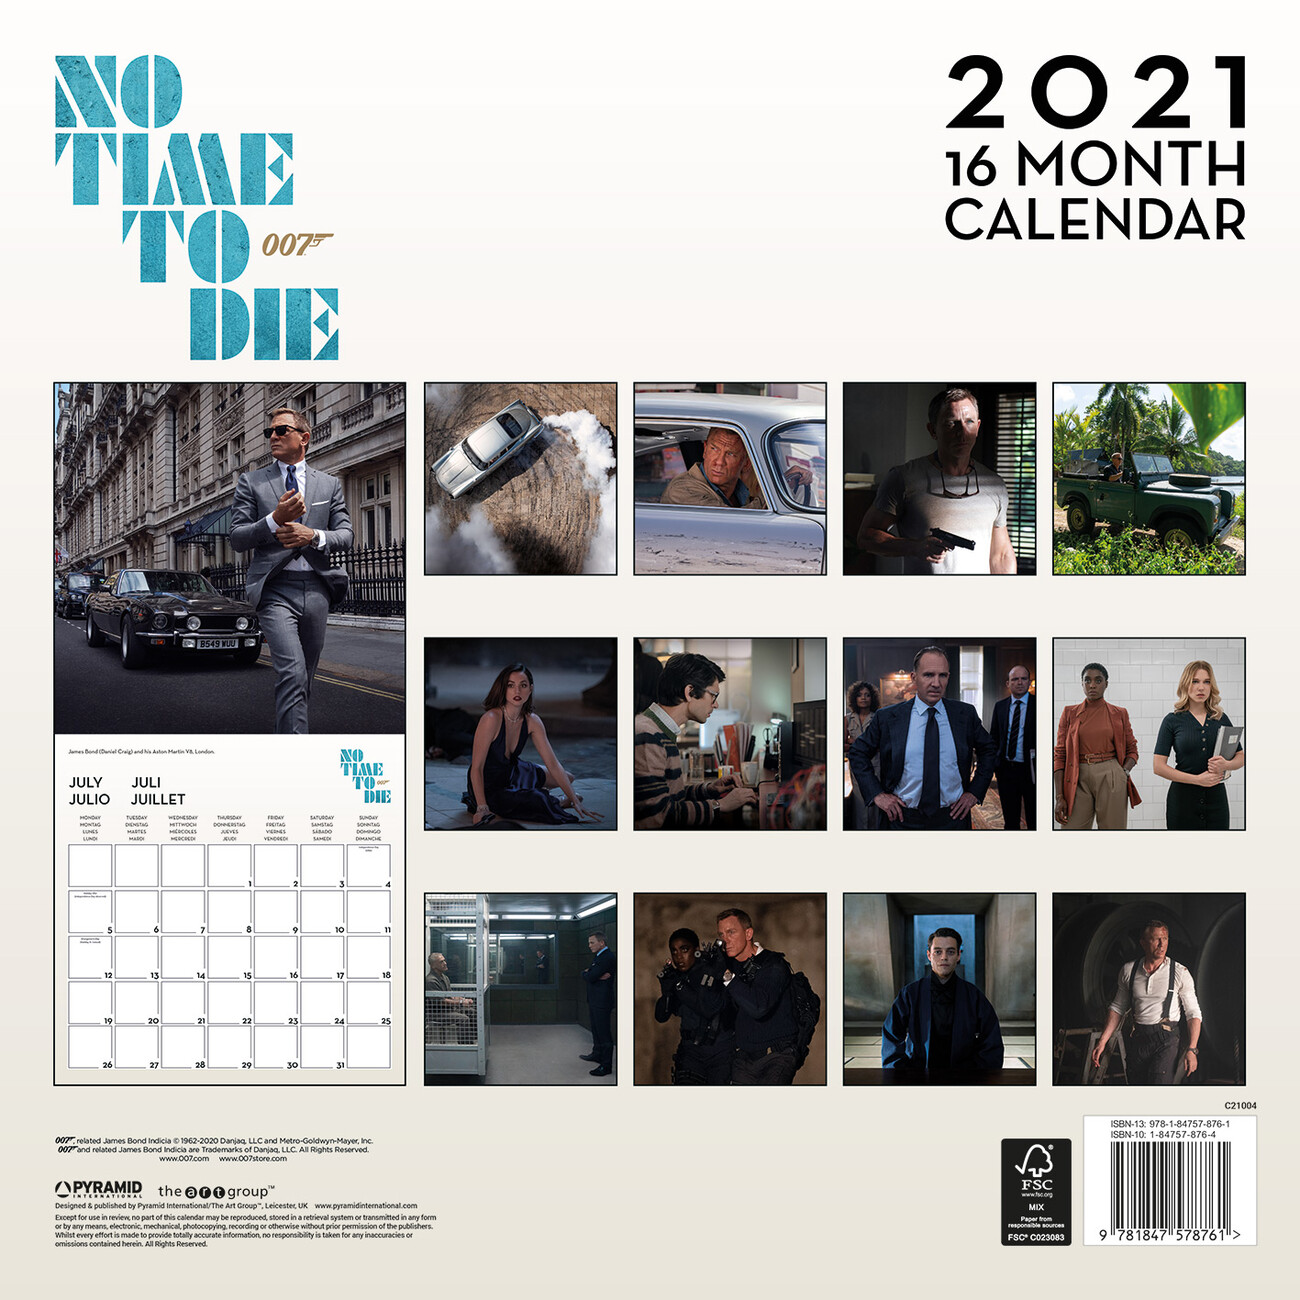 James Bond No Time to Die Wall Calendars 2021 Buy at Europosters